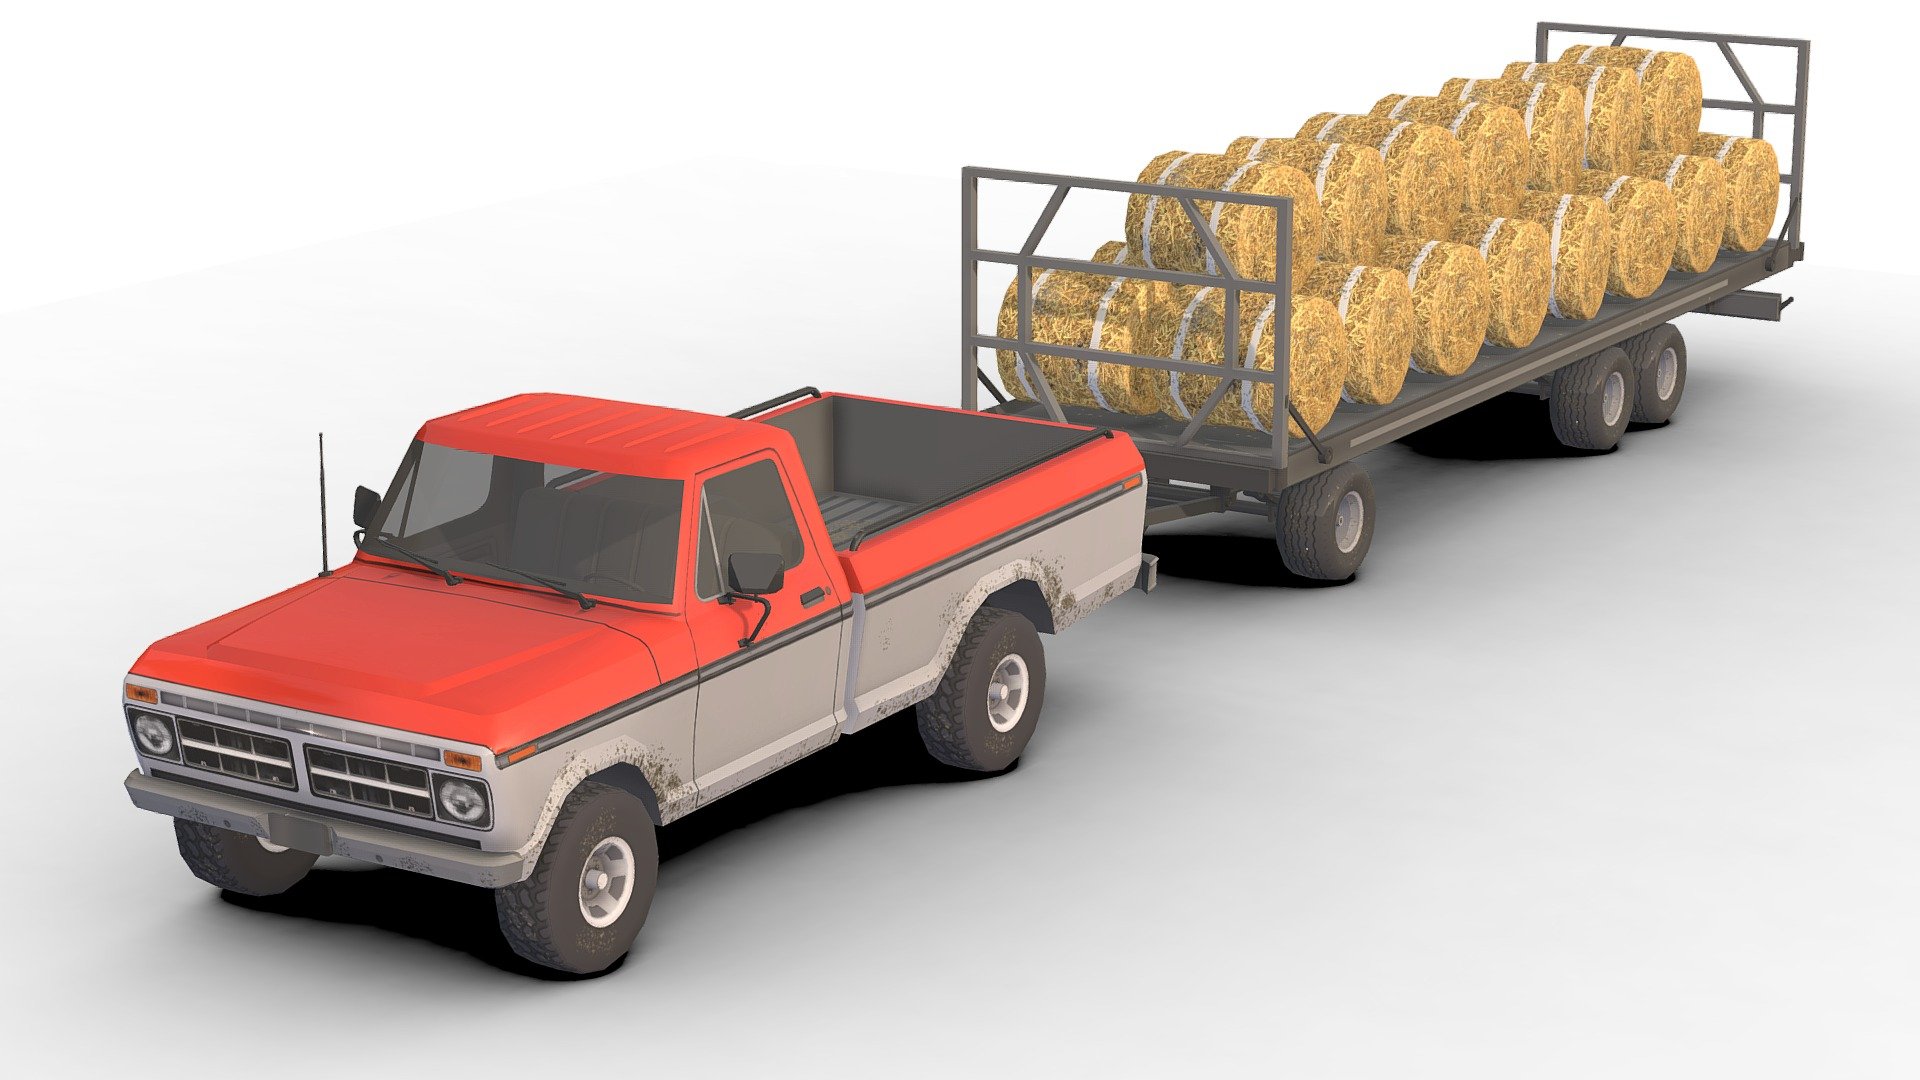 Farm Truck Vehicle Low_Poly .

You can use these models in any game and project.

This model is made with order and precision.

Separated parts (bodys . wheels . Steer ).

Very Low- Poly.

Truck have separate parts.

Average poly count: 19,000 tris.

Texture size: 2048 / 1024 (PNG).

Number of textures: 4.

Number of materials: 5.

Format: Fbx / Obj / 3DMax .

The original files are in the Additional file .

Wait for my new models.. Your friend (Sidra) 3d model